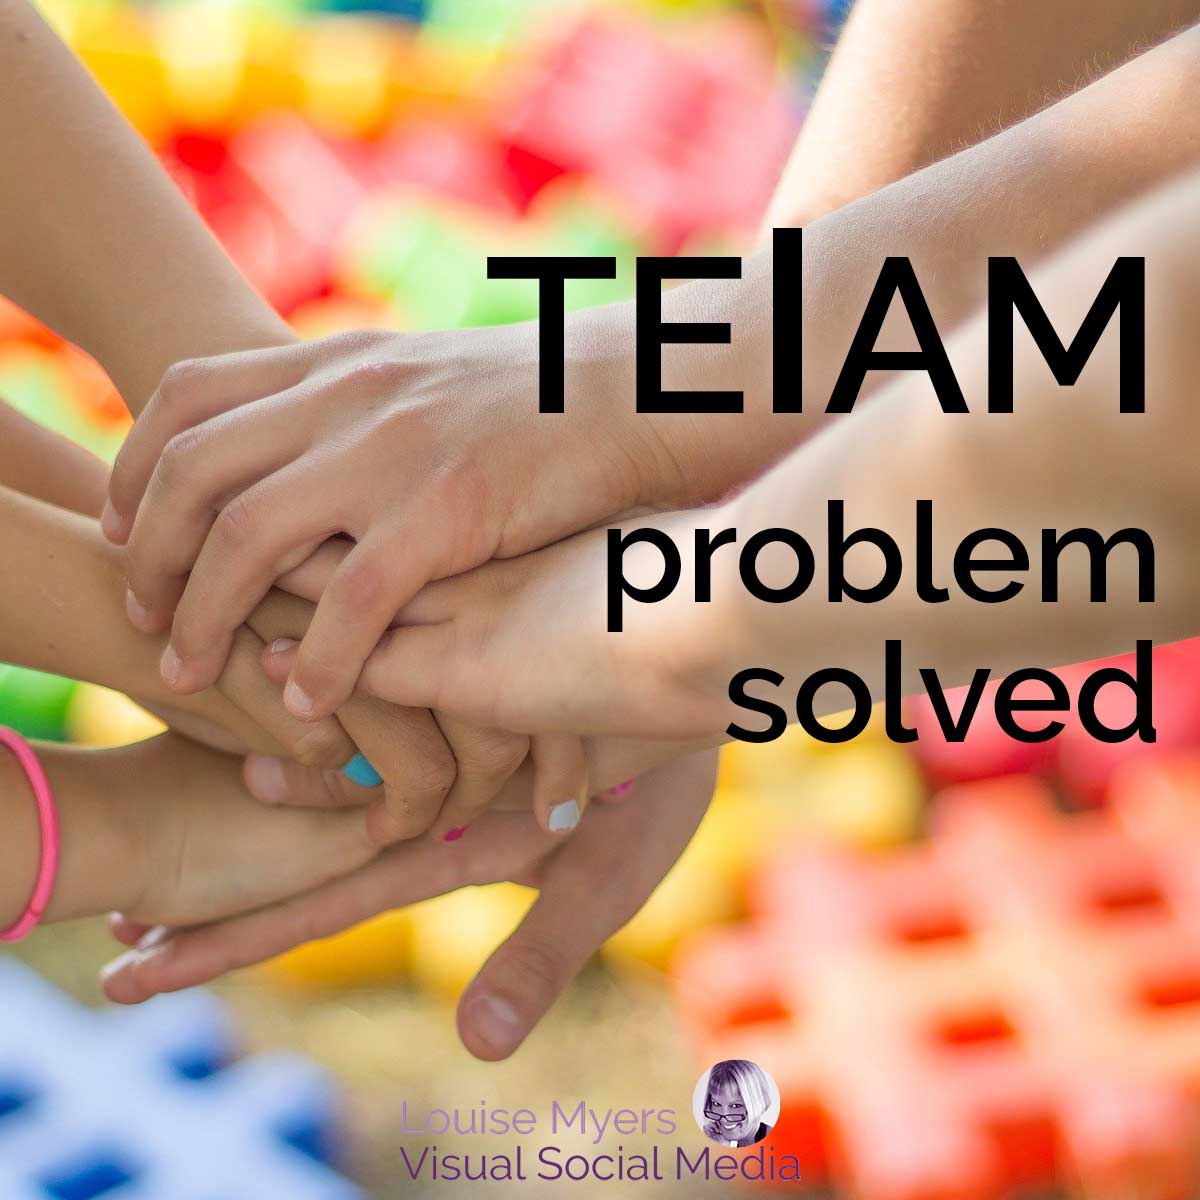 many hands clasped says T E I A M problem solved.